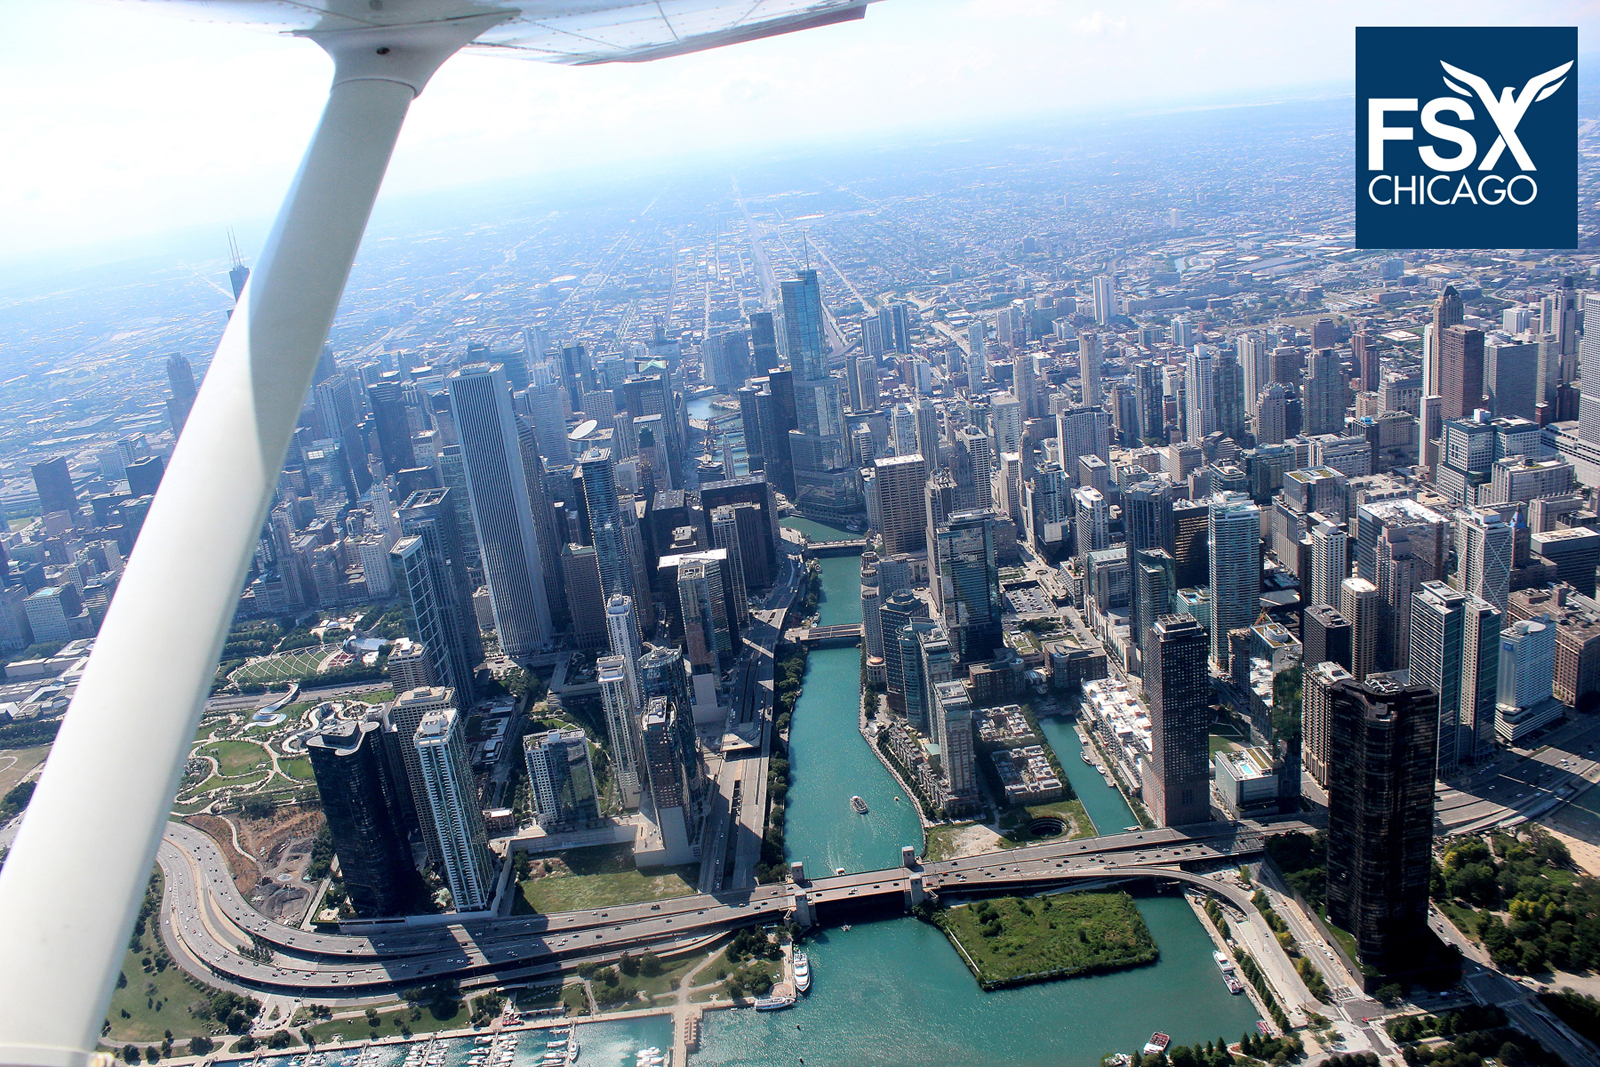 Skyline tours and Intro Flights - Call 708-299-8246 today!